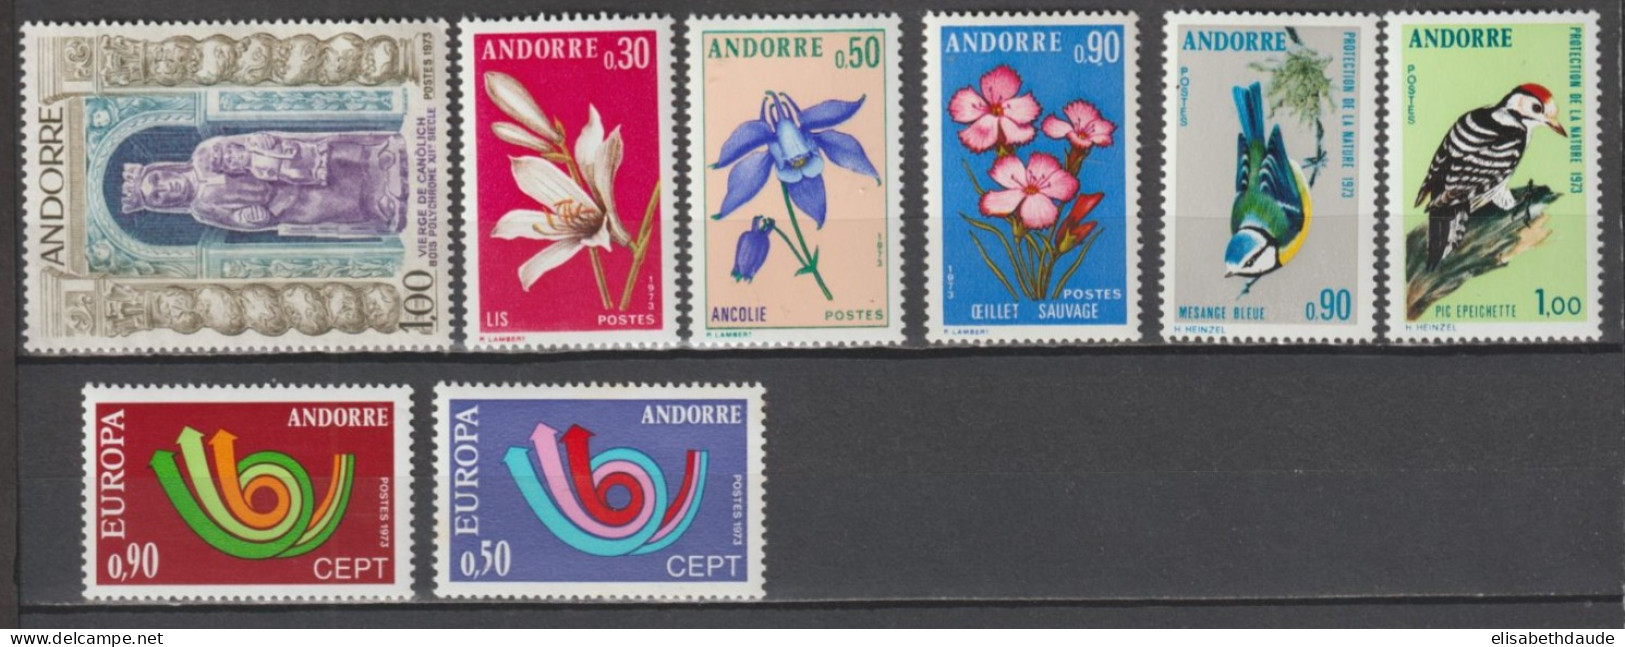 ANDORRE - ANNEE COMPLETE 1973 YVERT N° 226/233 ** MNH - COTE = 51.55 EUR. - - Annate Complete